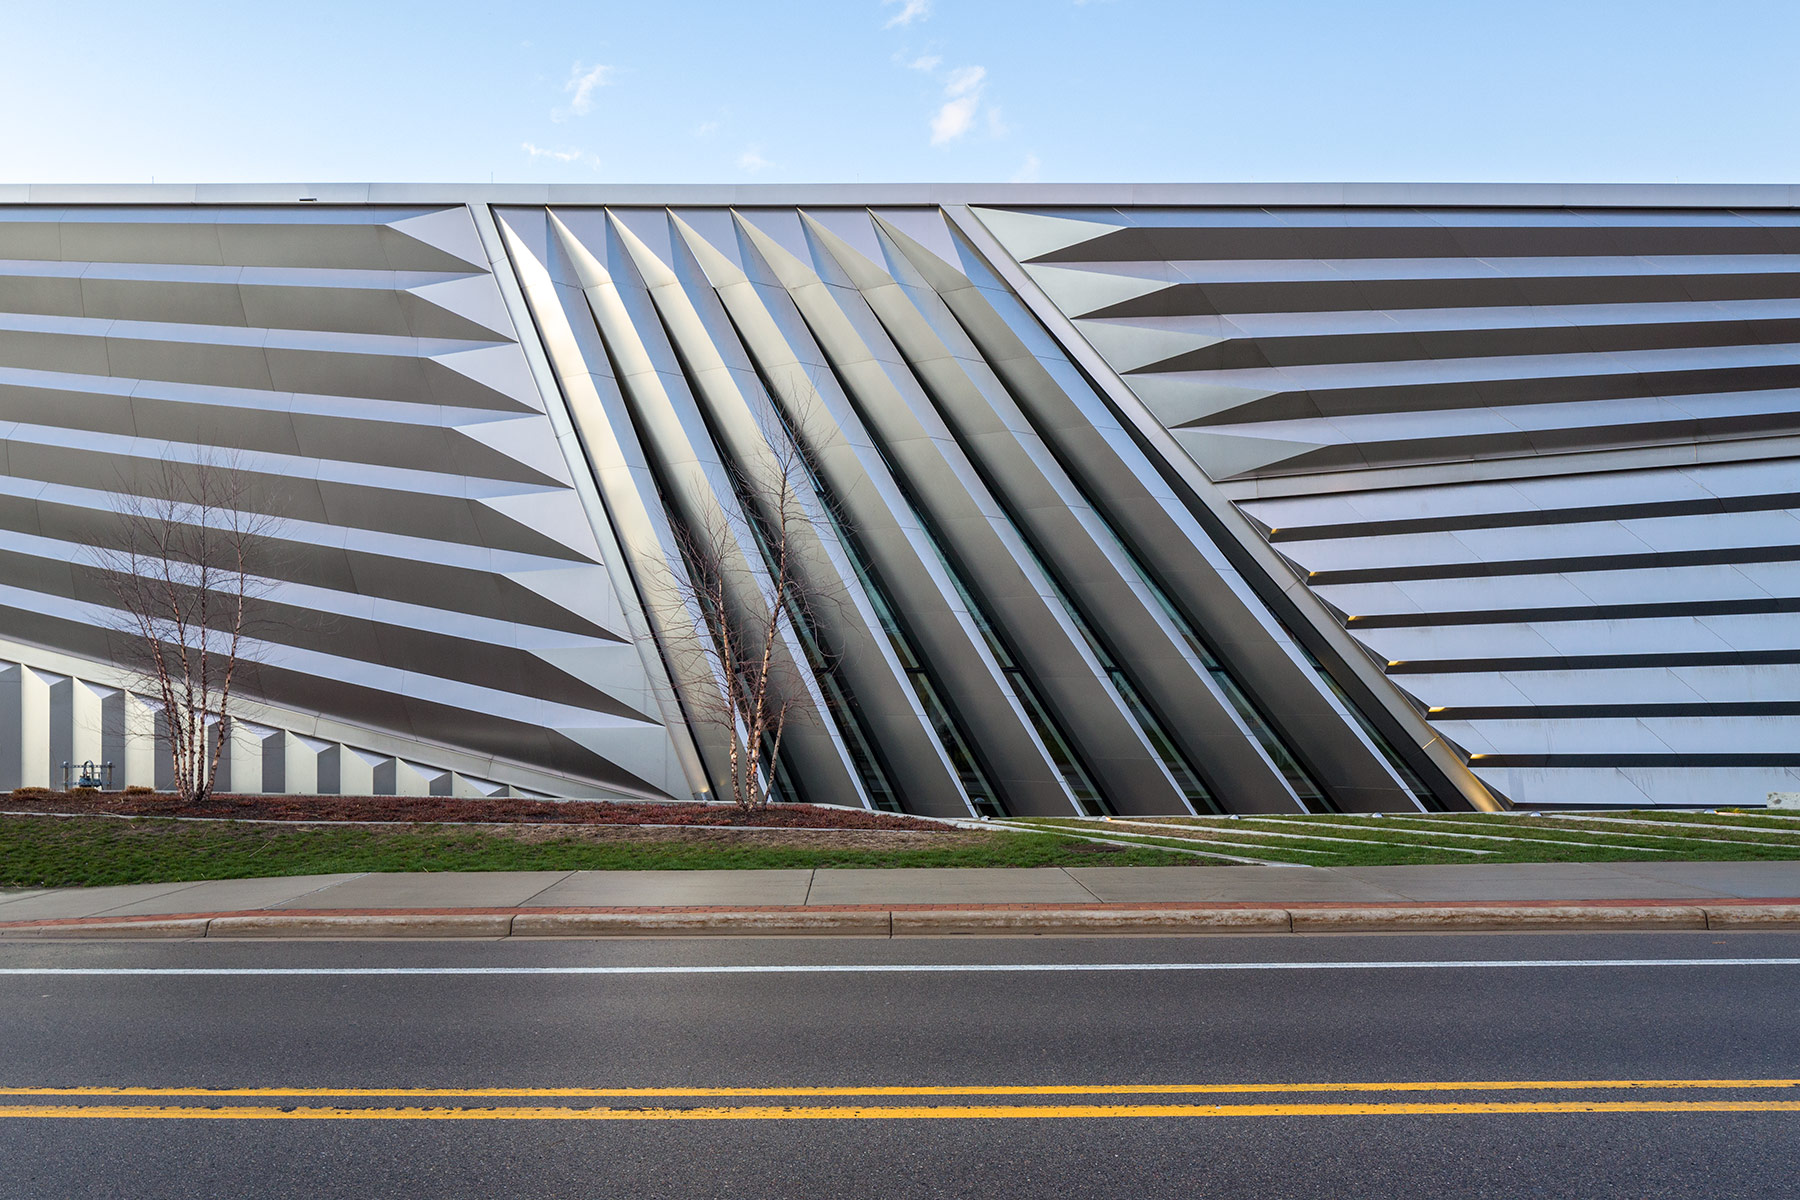 Exterior photograph of Ely and Edythe Broad Art Museum in East Lansing, Michigan by architect Zaha Hadid. Photo by Jason R. Woods.